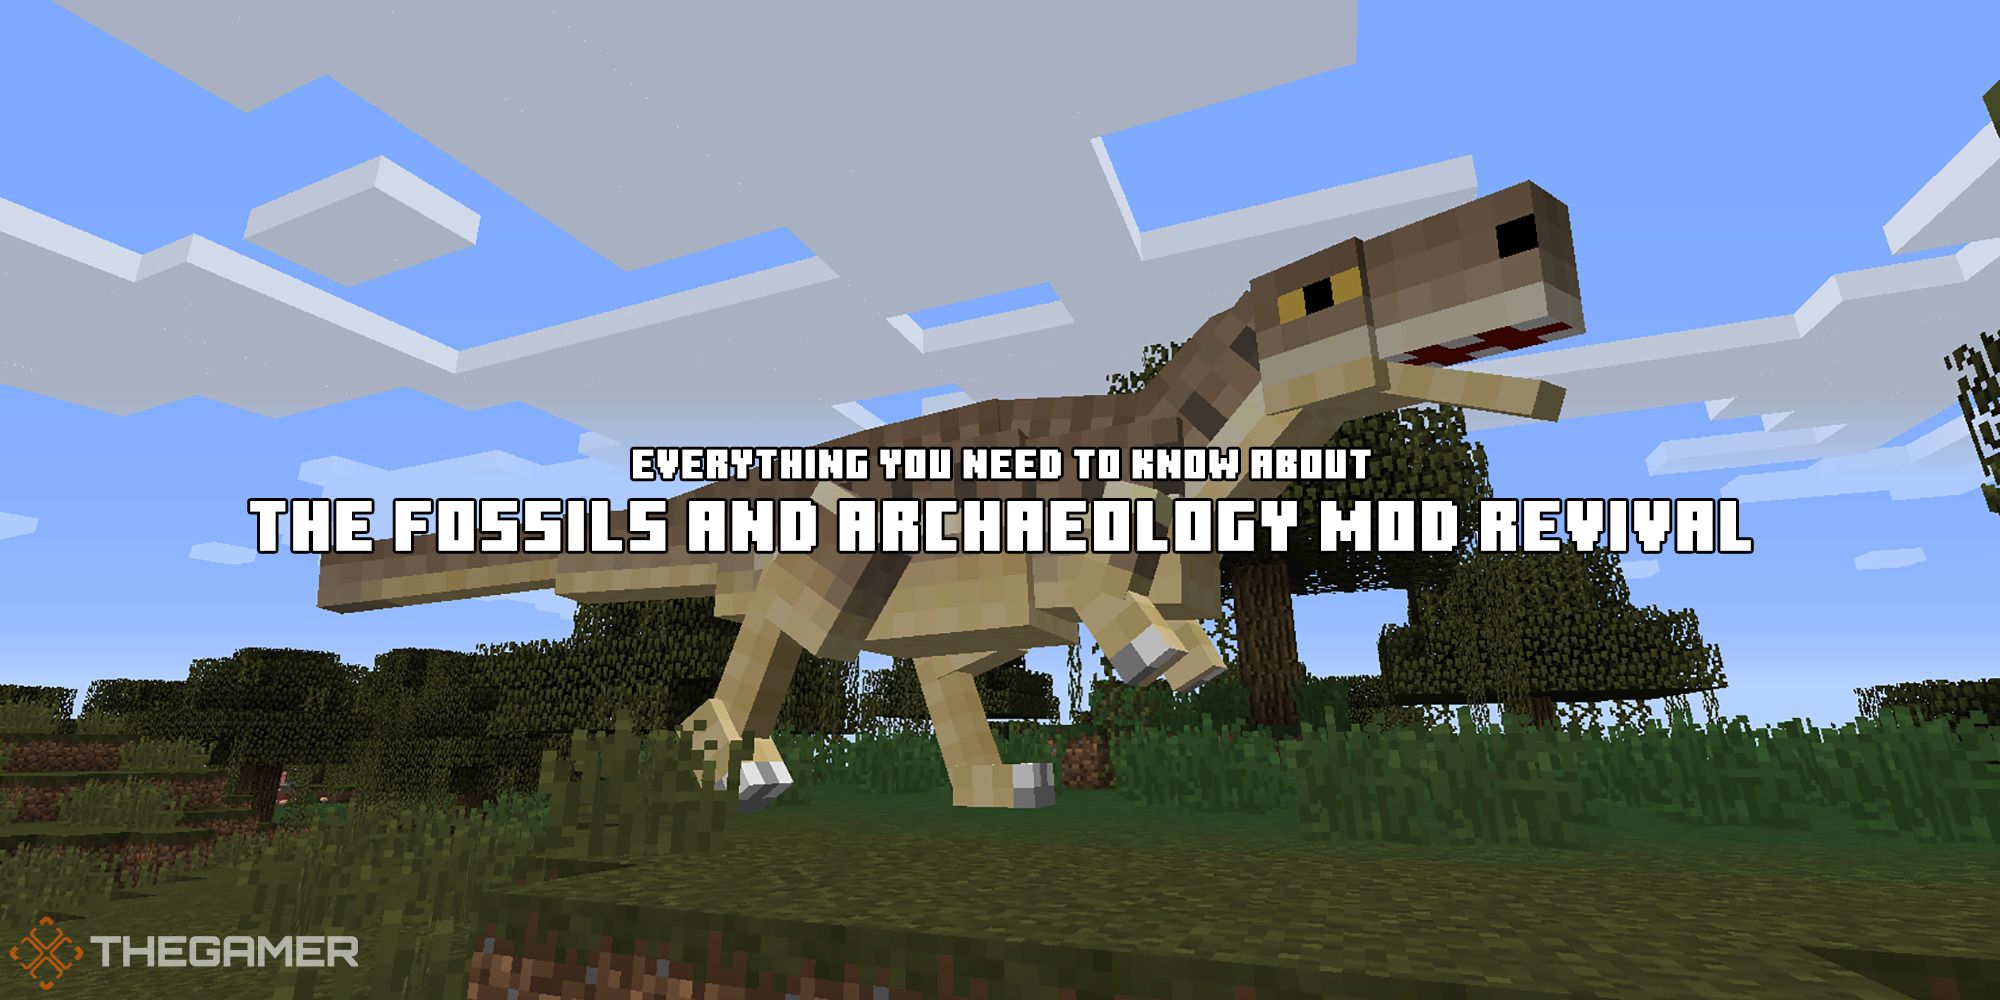 Minecraft Everything You Need To Know About The Fossils And Archaeology Mod Revival